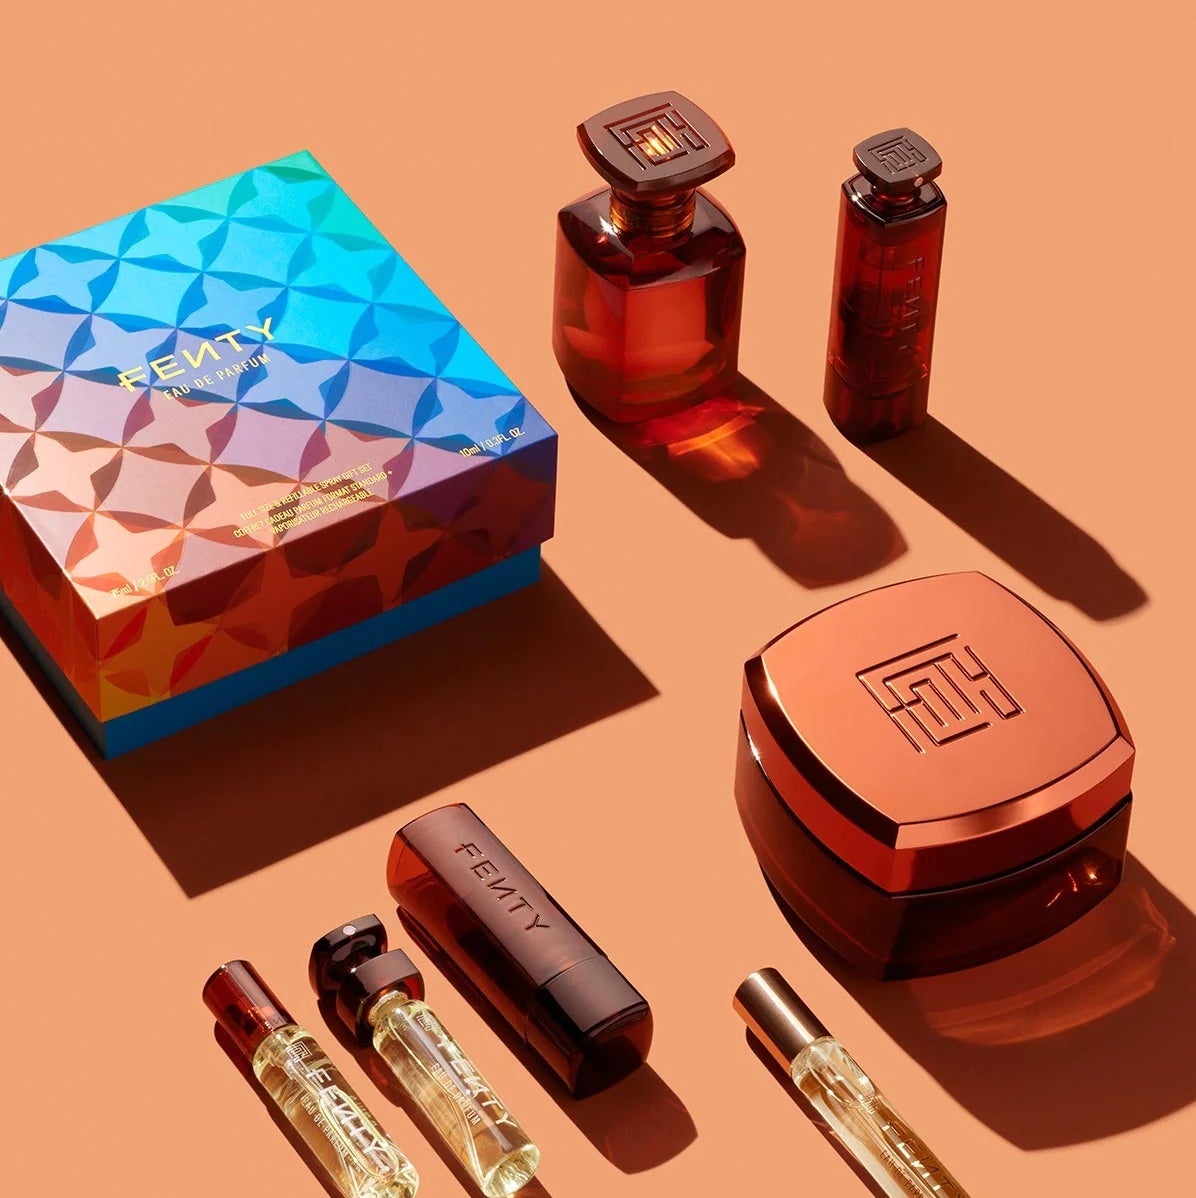 15 Best Perfume Gift Sets for Her in 2023: Fenty Beauty, Dior